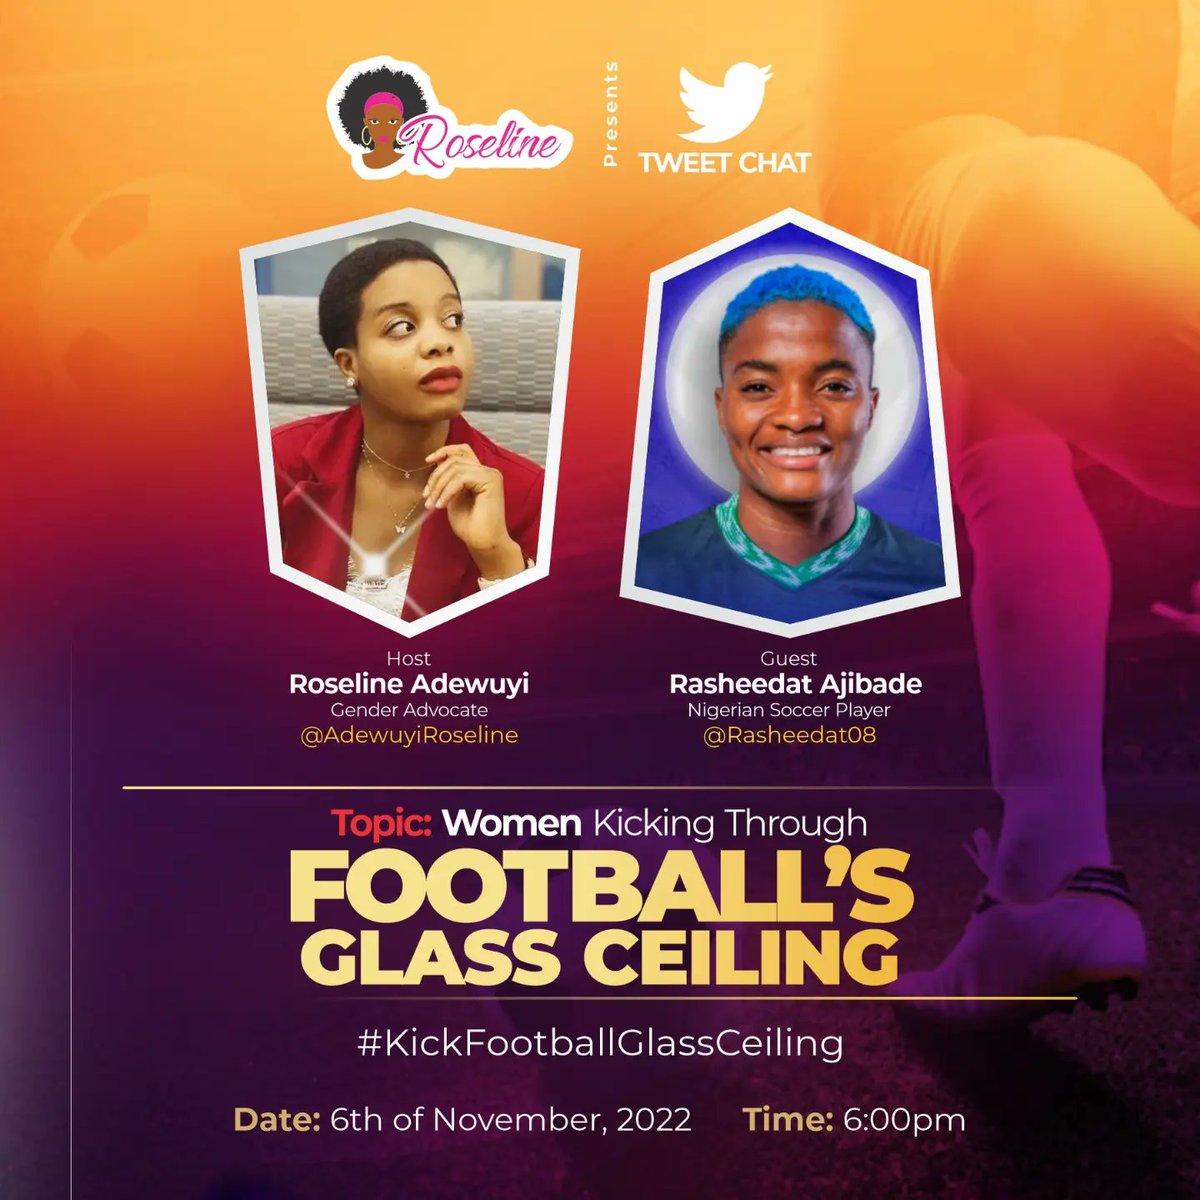 I will be hosting a Twitter chat with Rasheedat Ajibade @Rasheedat08, a Nigerian Soccer Player on the 6th of November by 6 p.m. on Kicking Through Football's Glass Ceiling. Kindly check the flyer for more information. #KickFootballGlassCeiling The aim of this is so that many